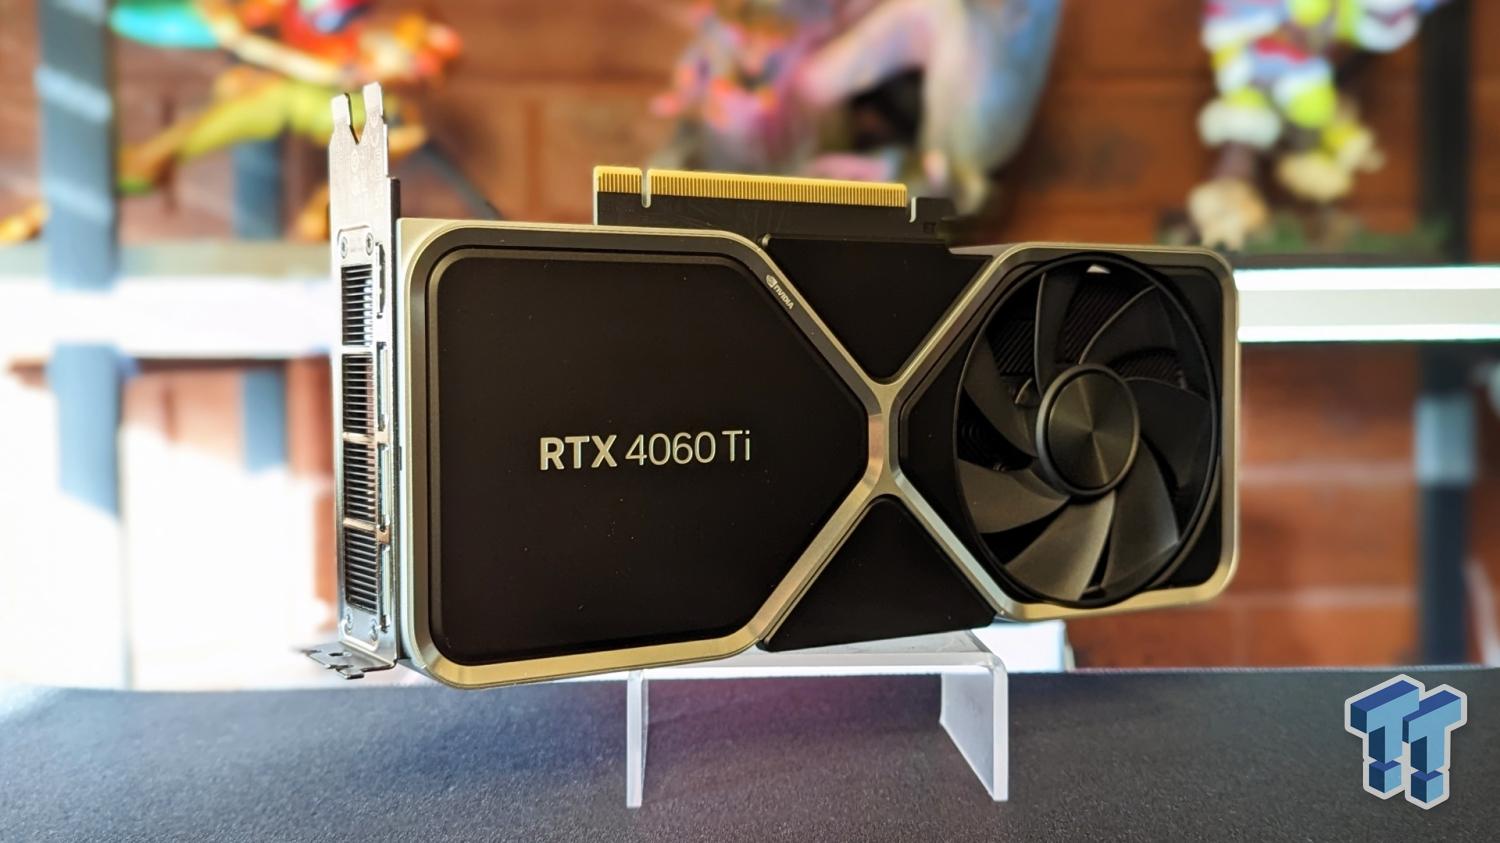 GeForce RTX 4060 Ti: DLSS Upscaling and Frame Generation - Nvidia GeForce RTX  4060 Ti Review: 1080p Gaming for $399 - Page 7